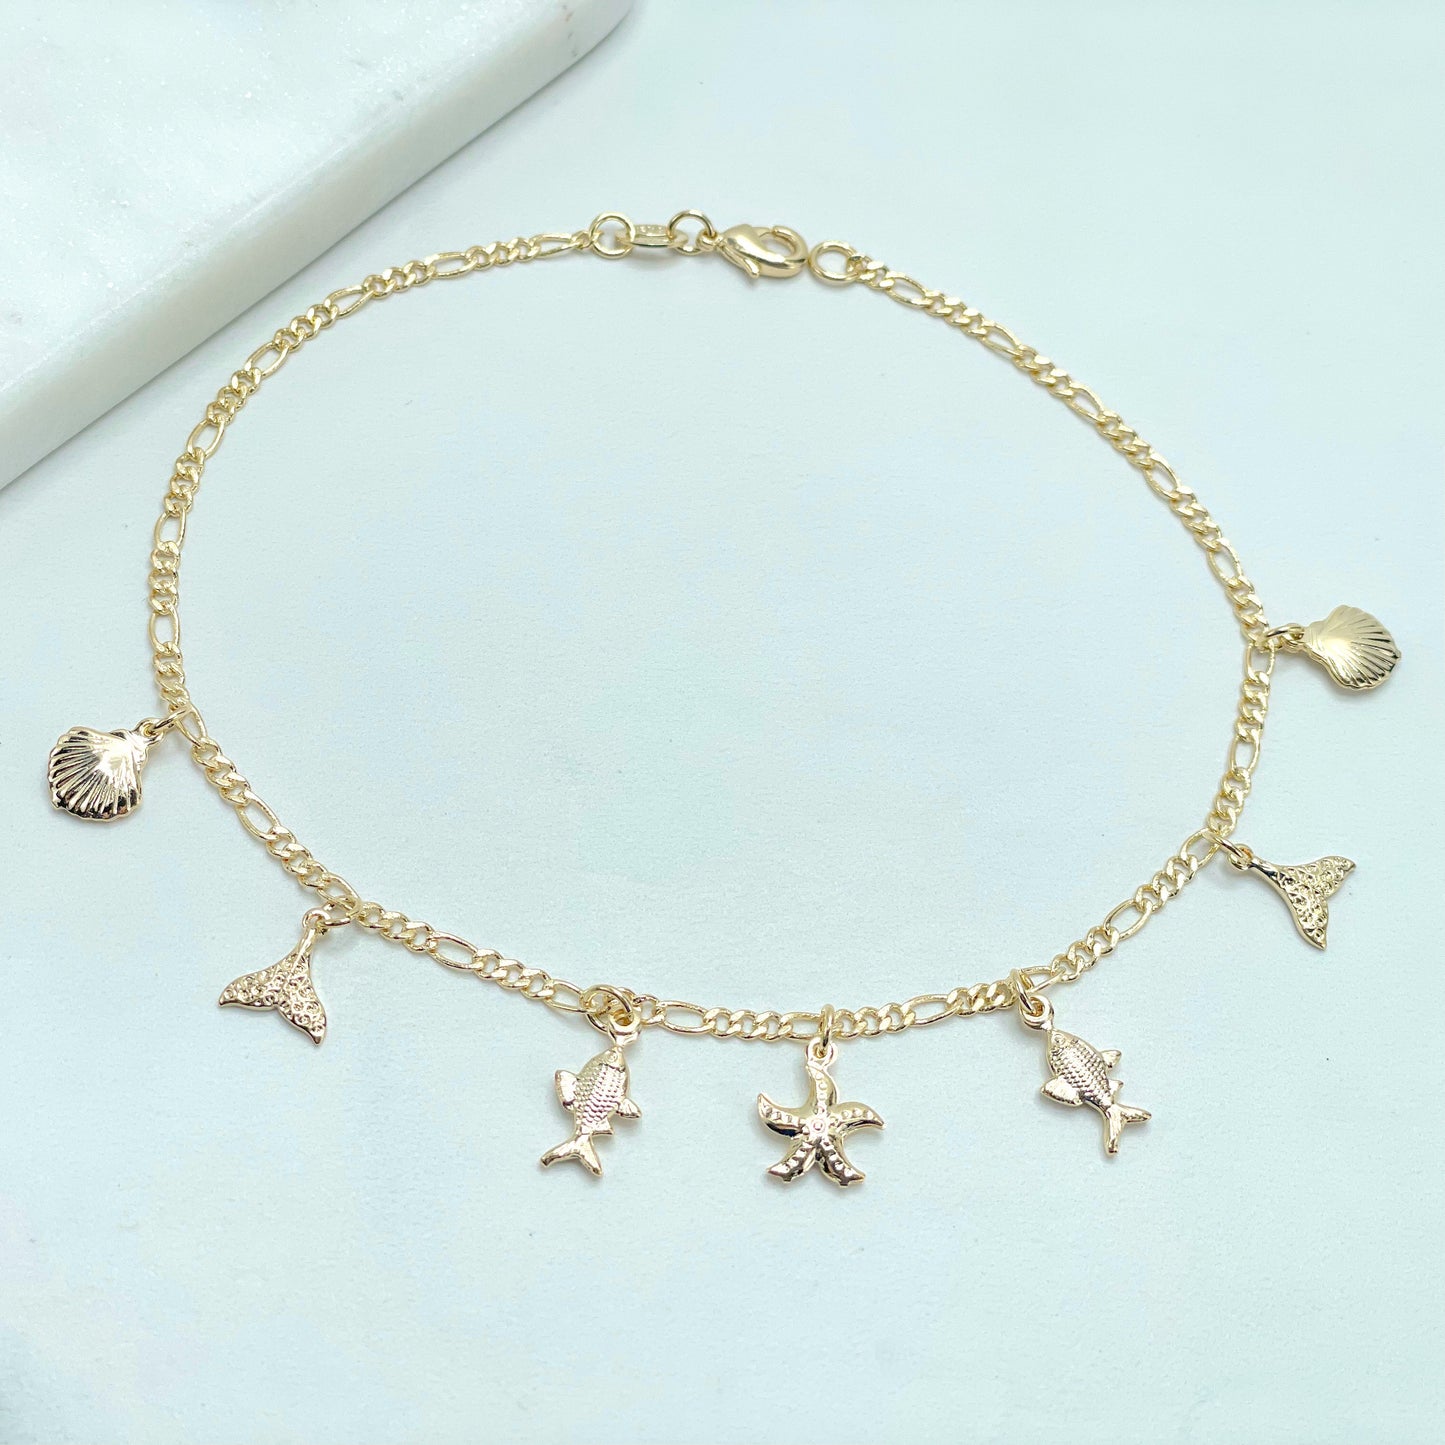 18k Gold Filled 2.4mm Figaro Link Chain, Sea Theme Charms, Starfish, Whale Tale, Fish, Shell, Anklet Wholesale Jewelry Making Supplies